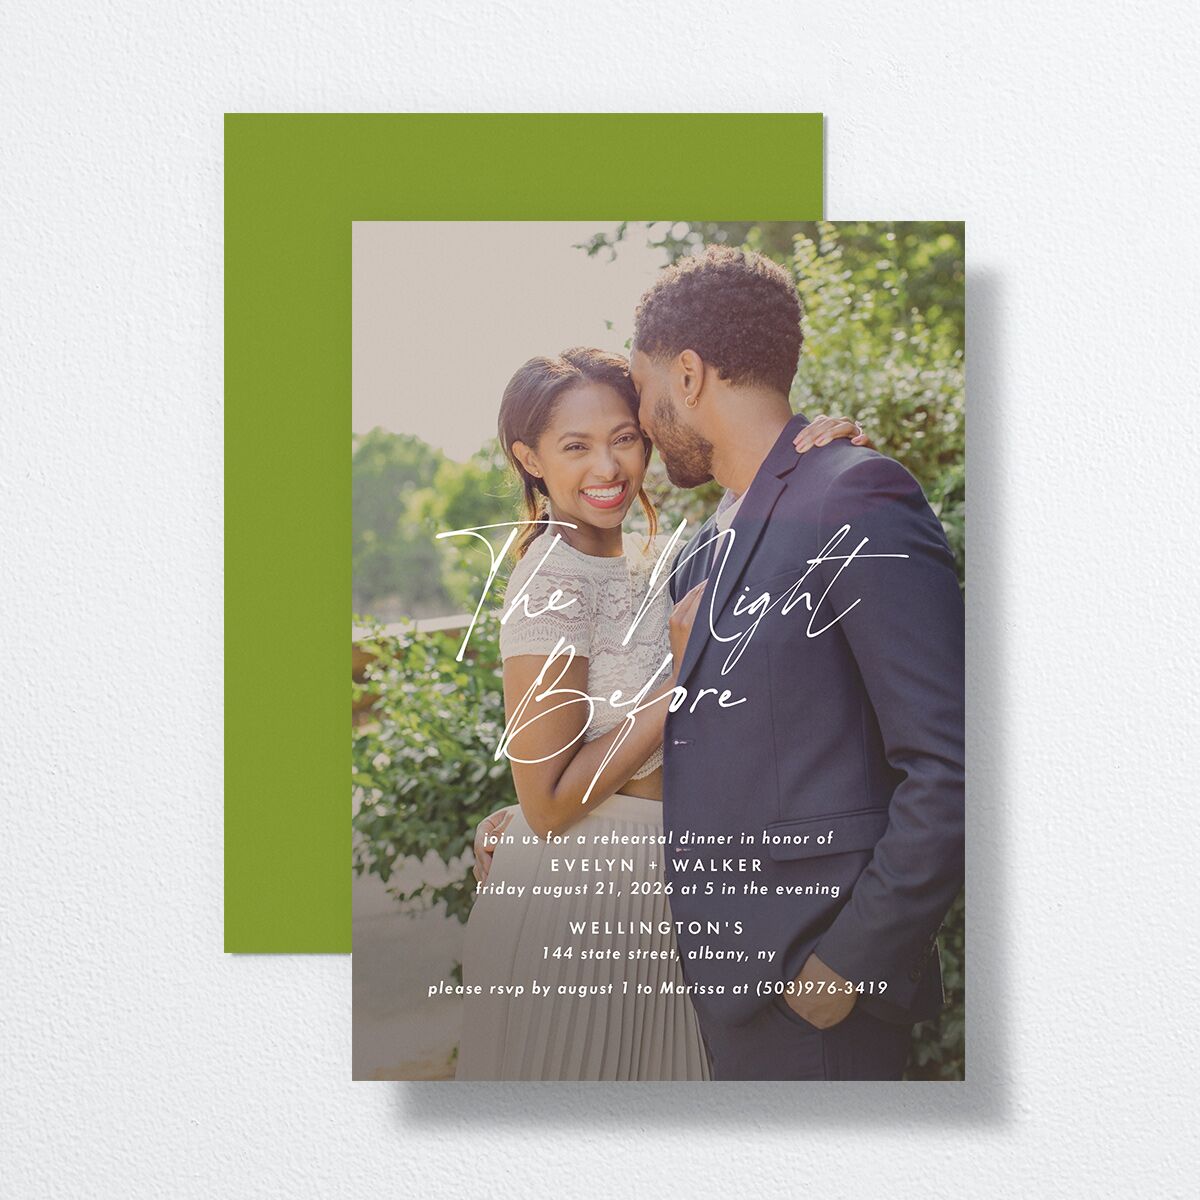 Picture This Rehearsal Dinner Invitations front-and-back